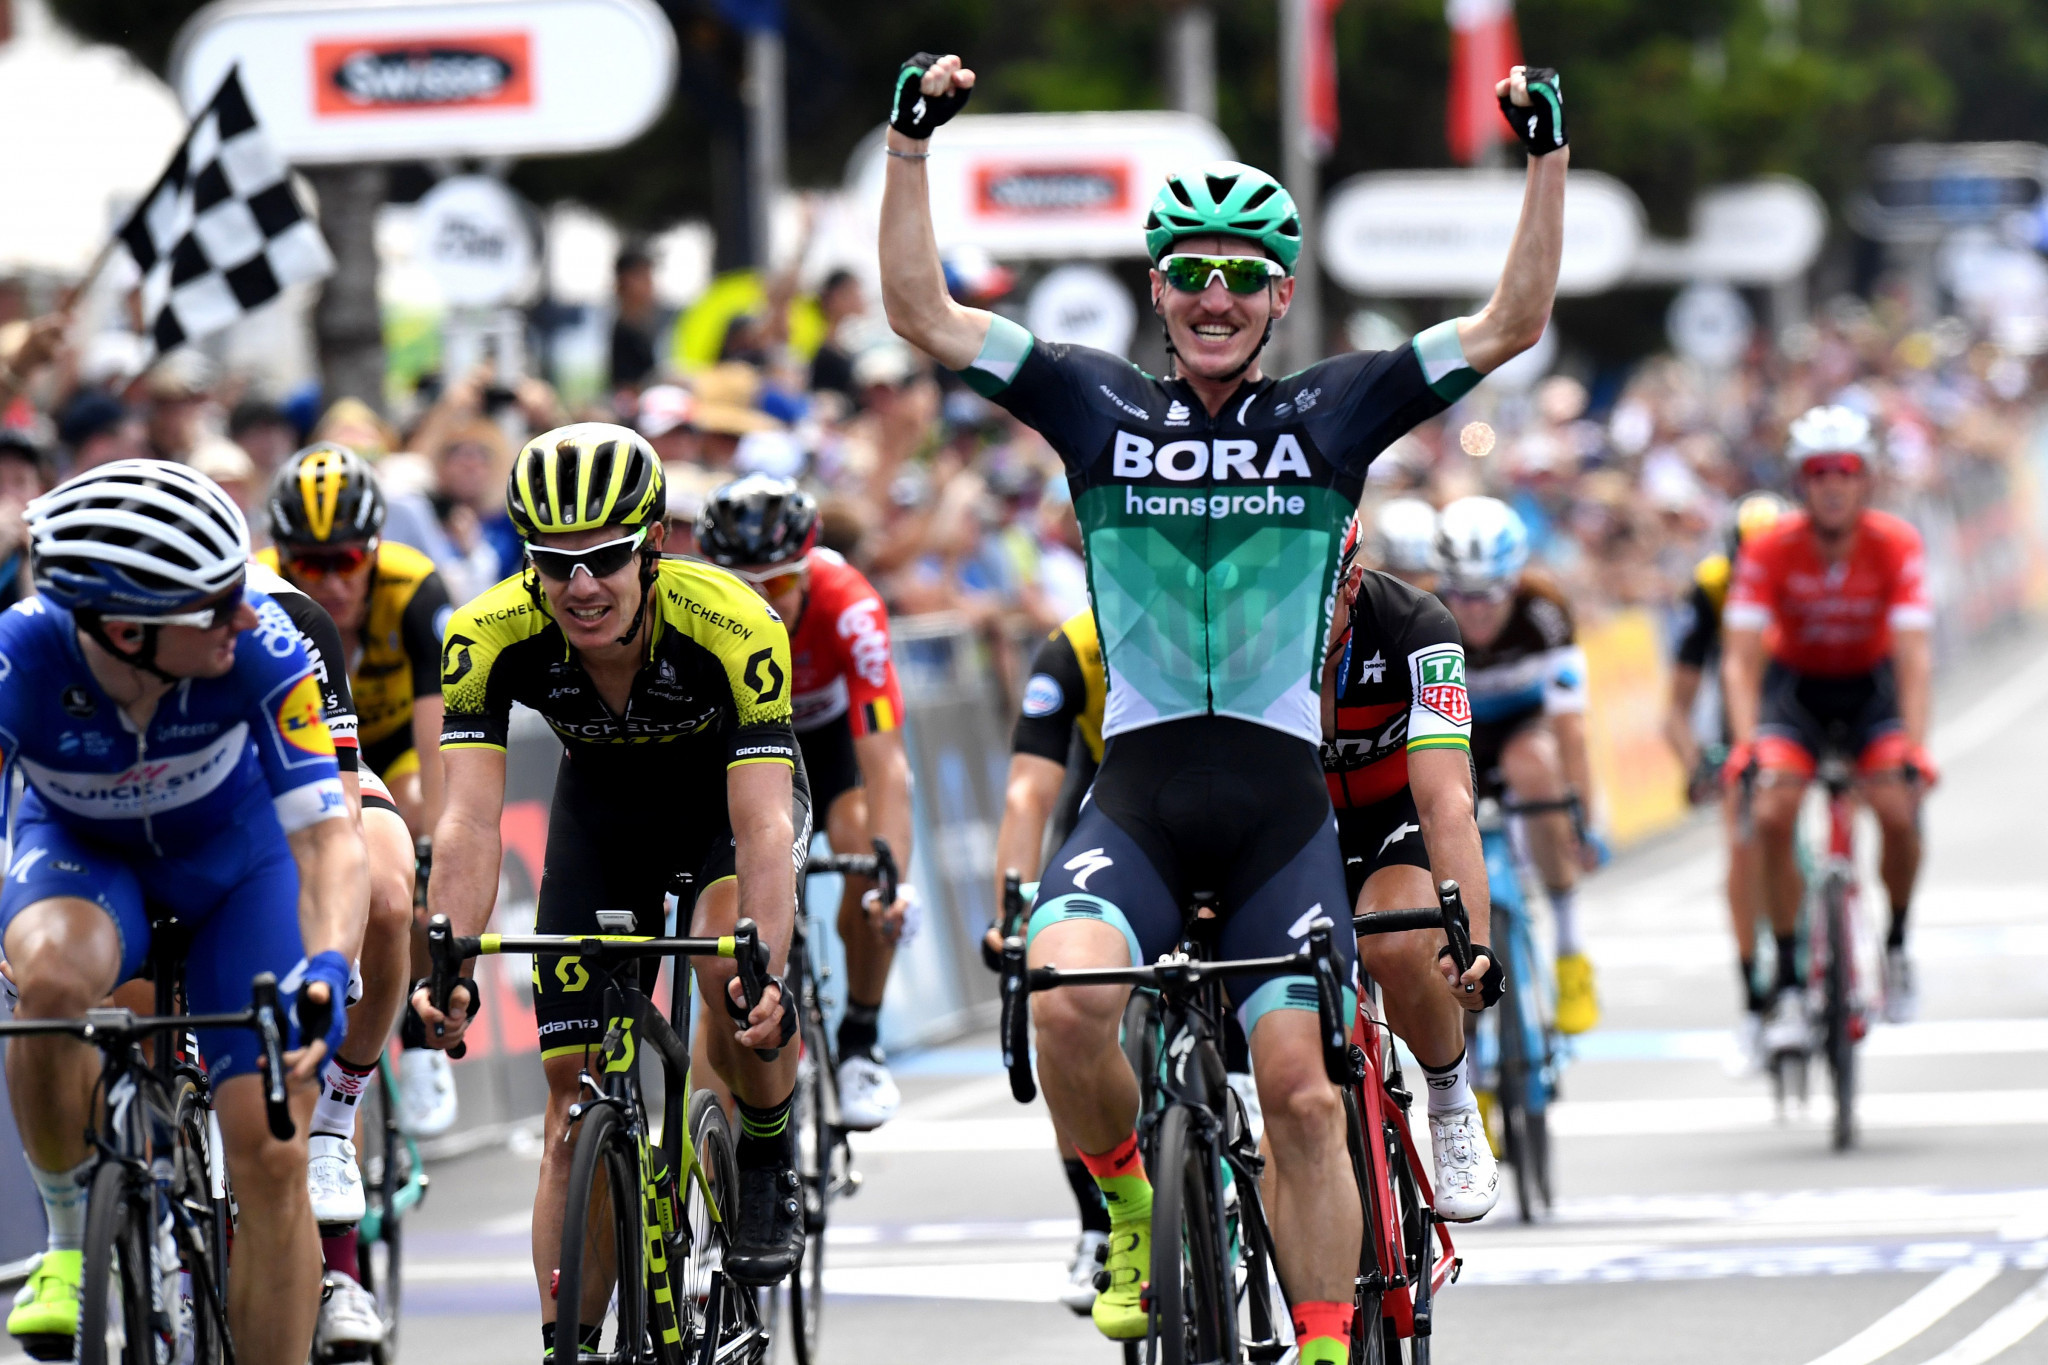 McCarthy claims victory on stage three of Tour of the Basque Country